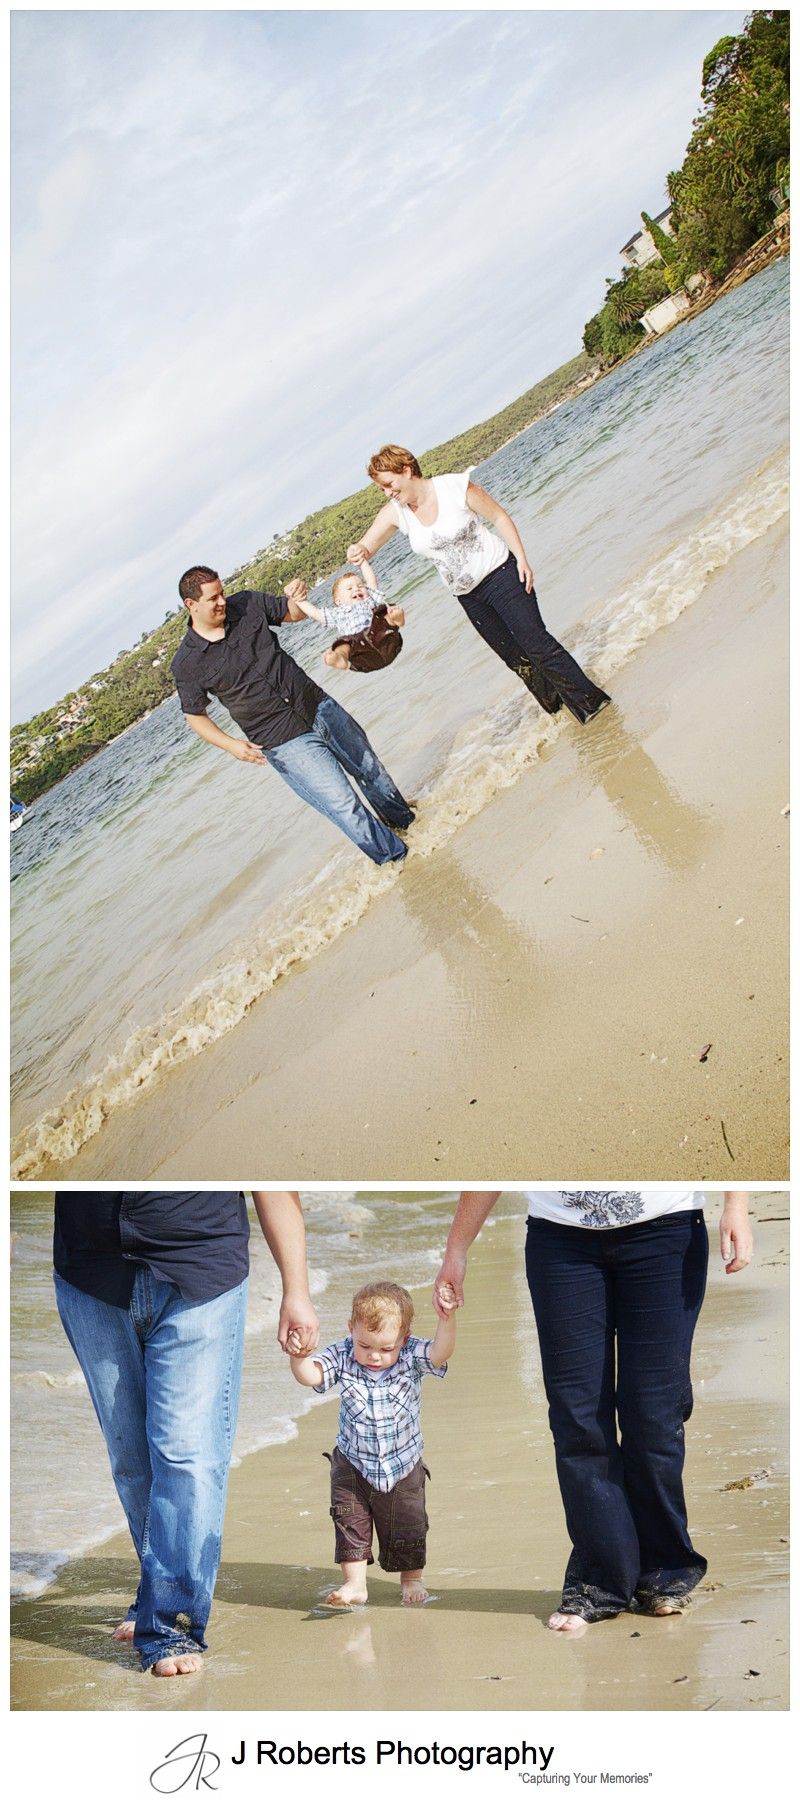 Little boy being swung by his parents at the beach - family portrait photography sydney